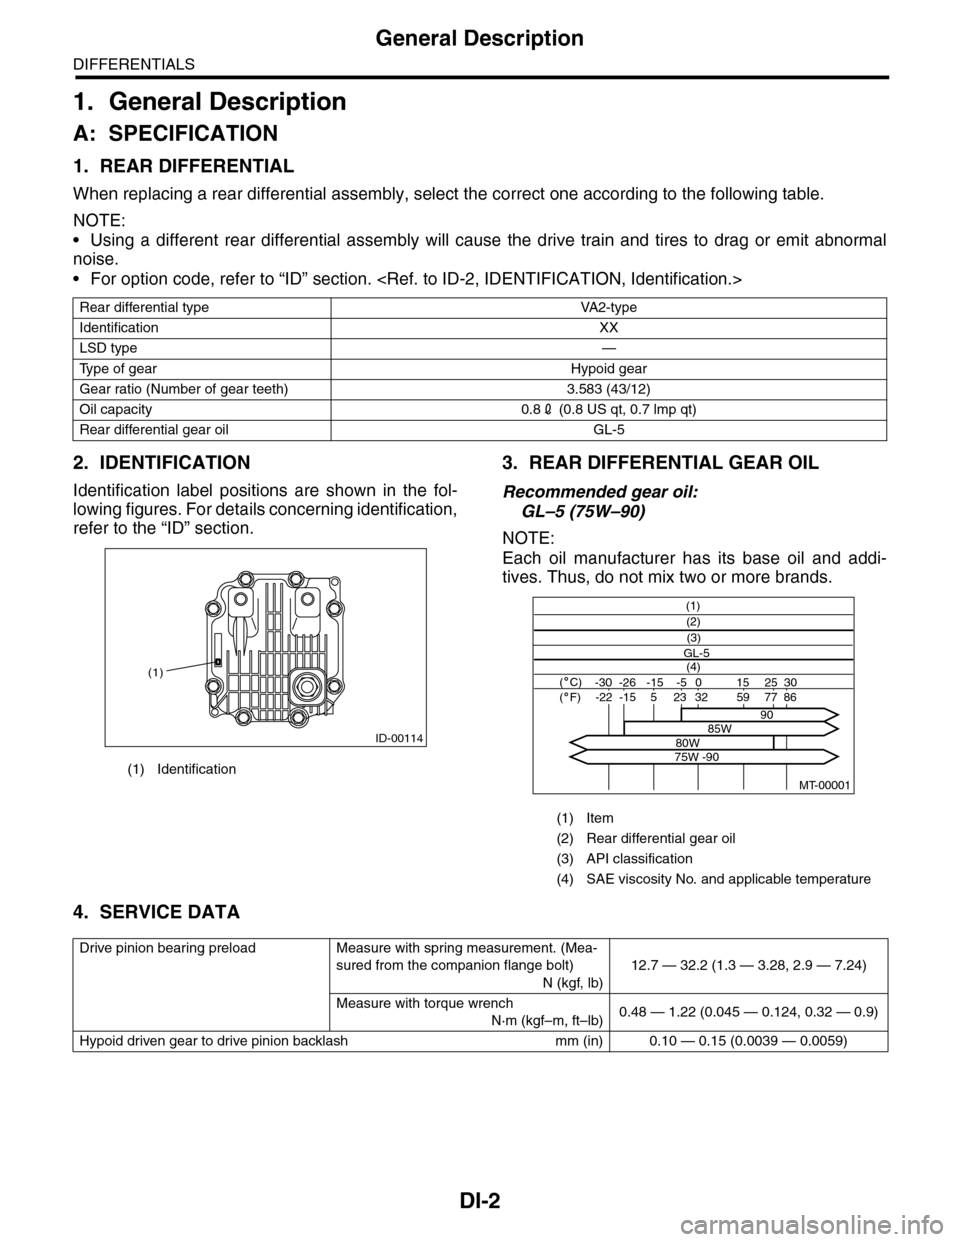 SUBARU TRIBECA 2009 1.G Service Workshop Manual DI-2
General Description
DIFFERENTIALS
1. General Description
A: SPECIFICATION
1. REAR DIFFERENTIAL
When replacing a rear differential assembly, select the correct one according to the following table